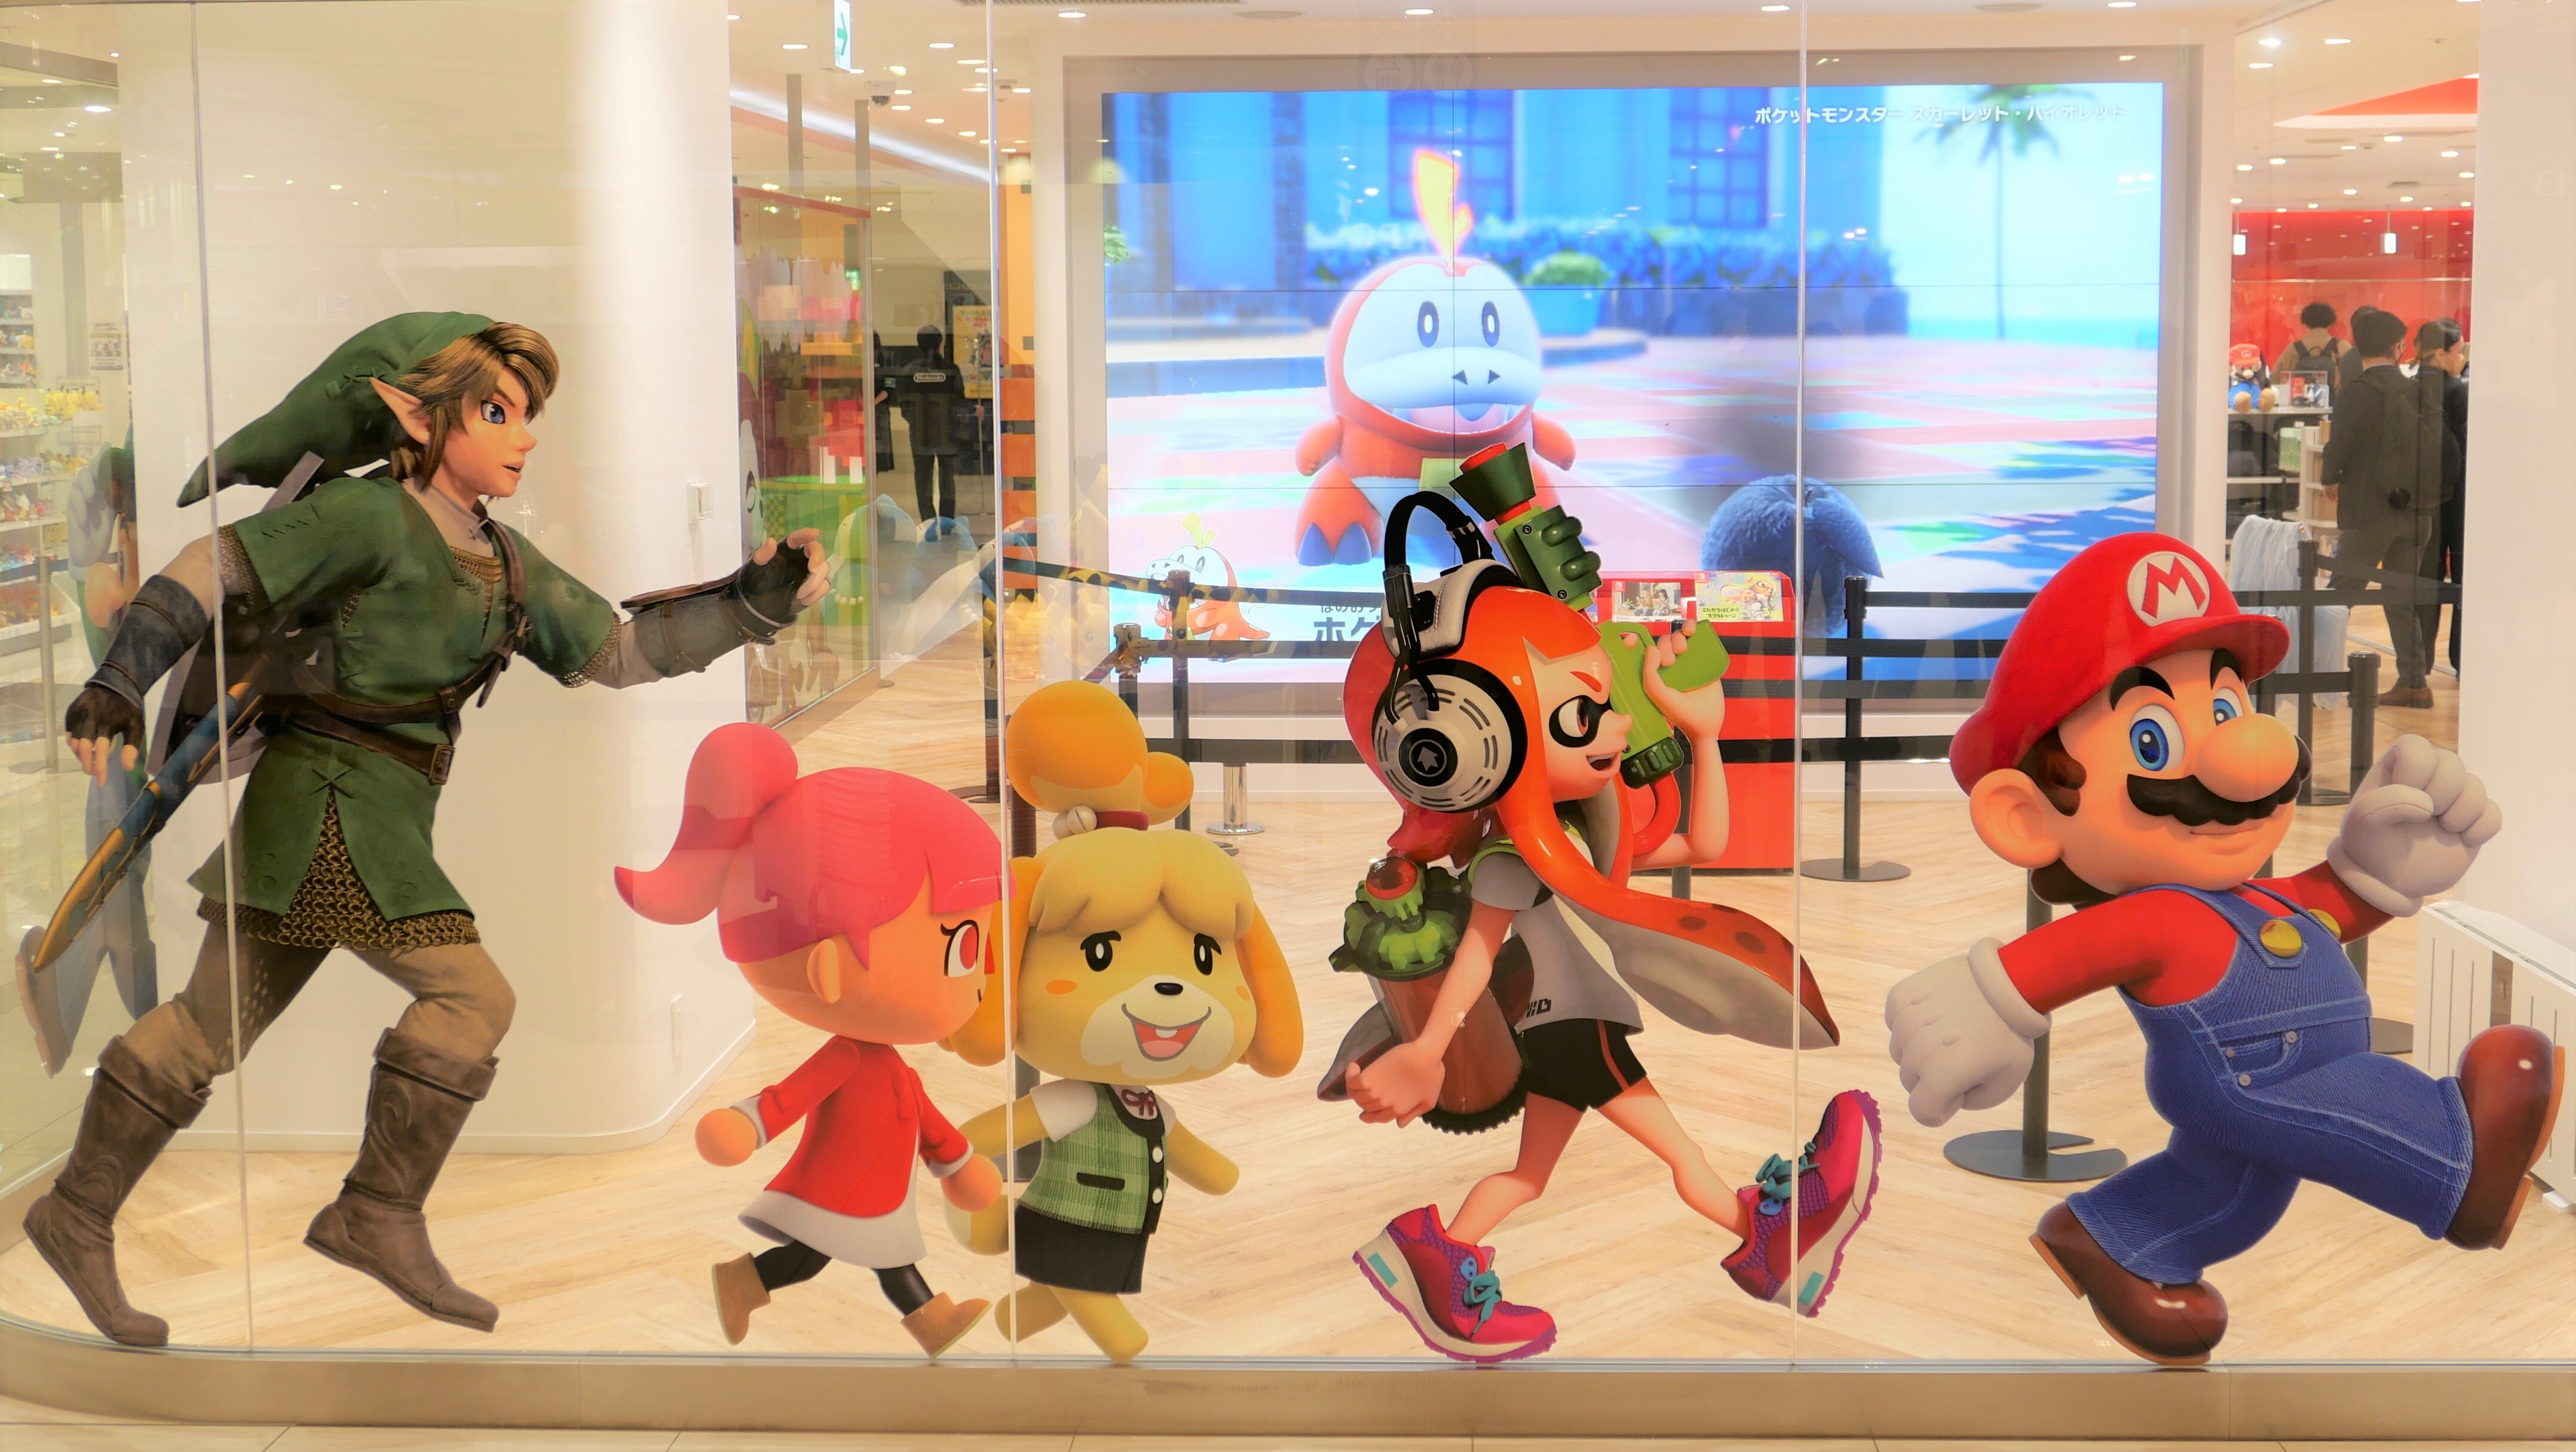 Nintendo is opening its second official Japan store in Osaka